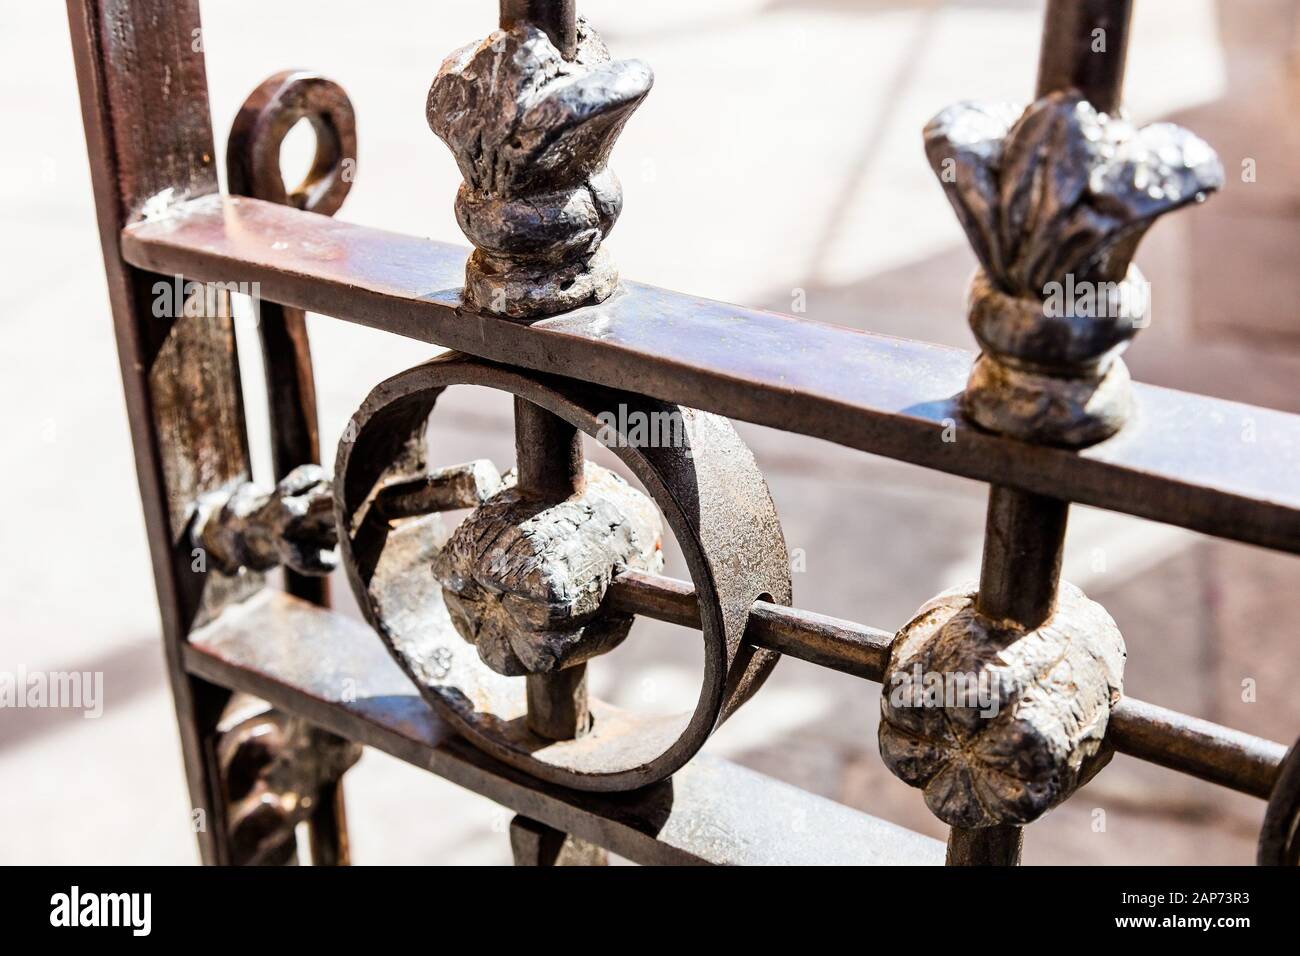 Metal fence with ornamental design Stock Photo